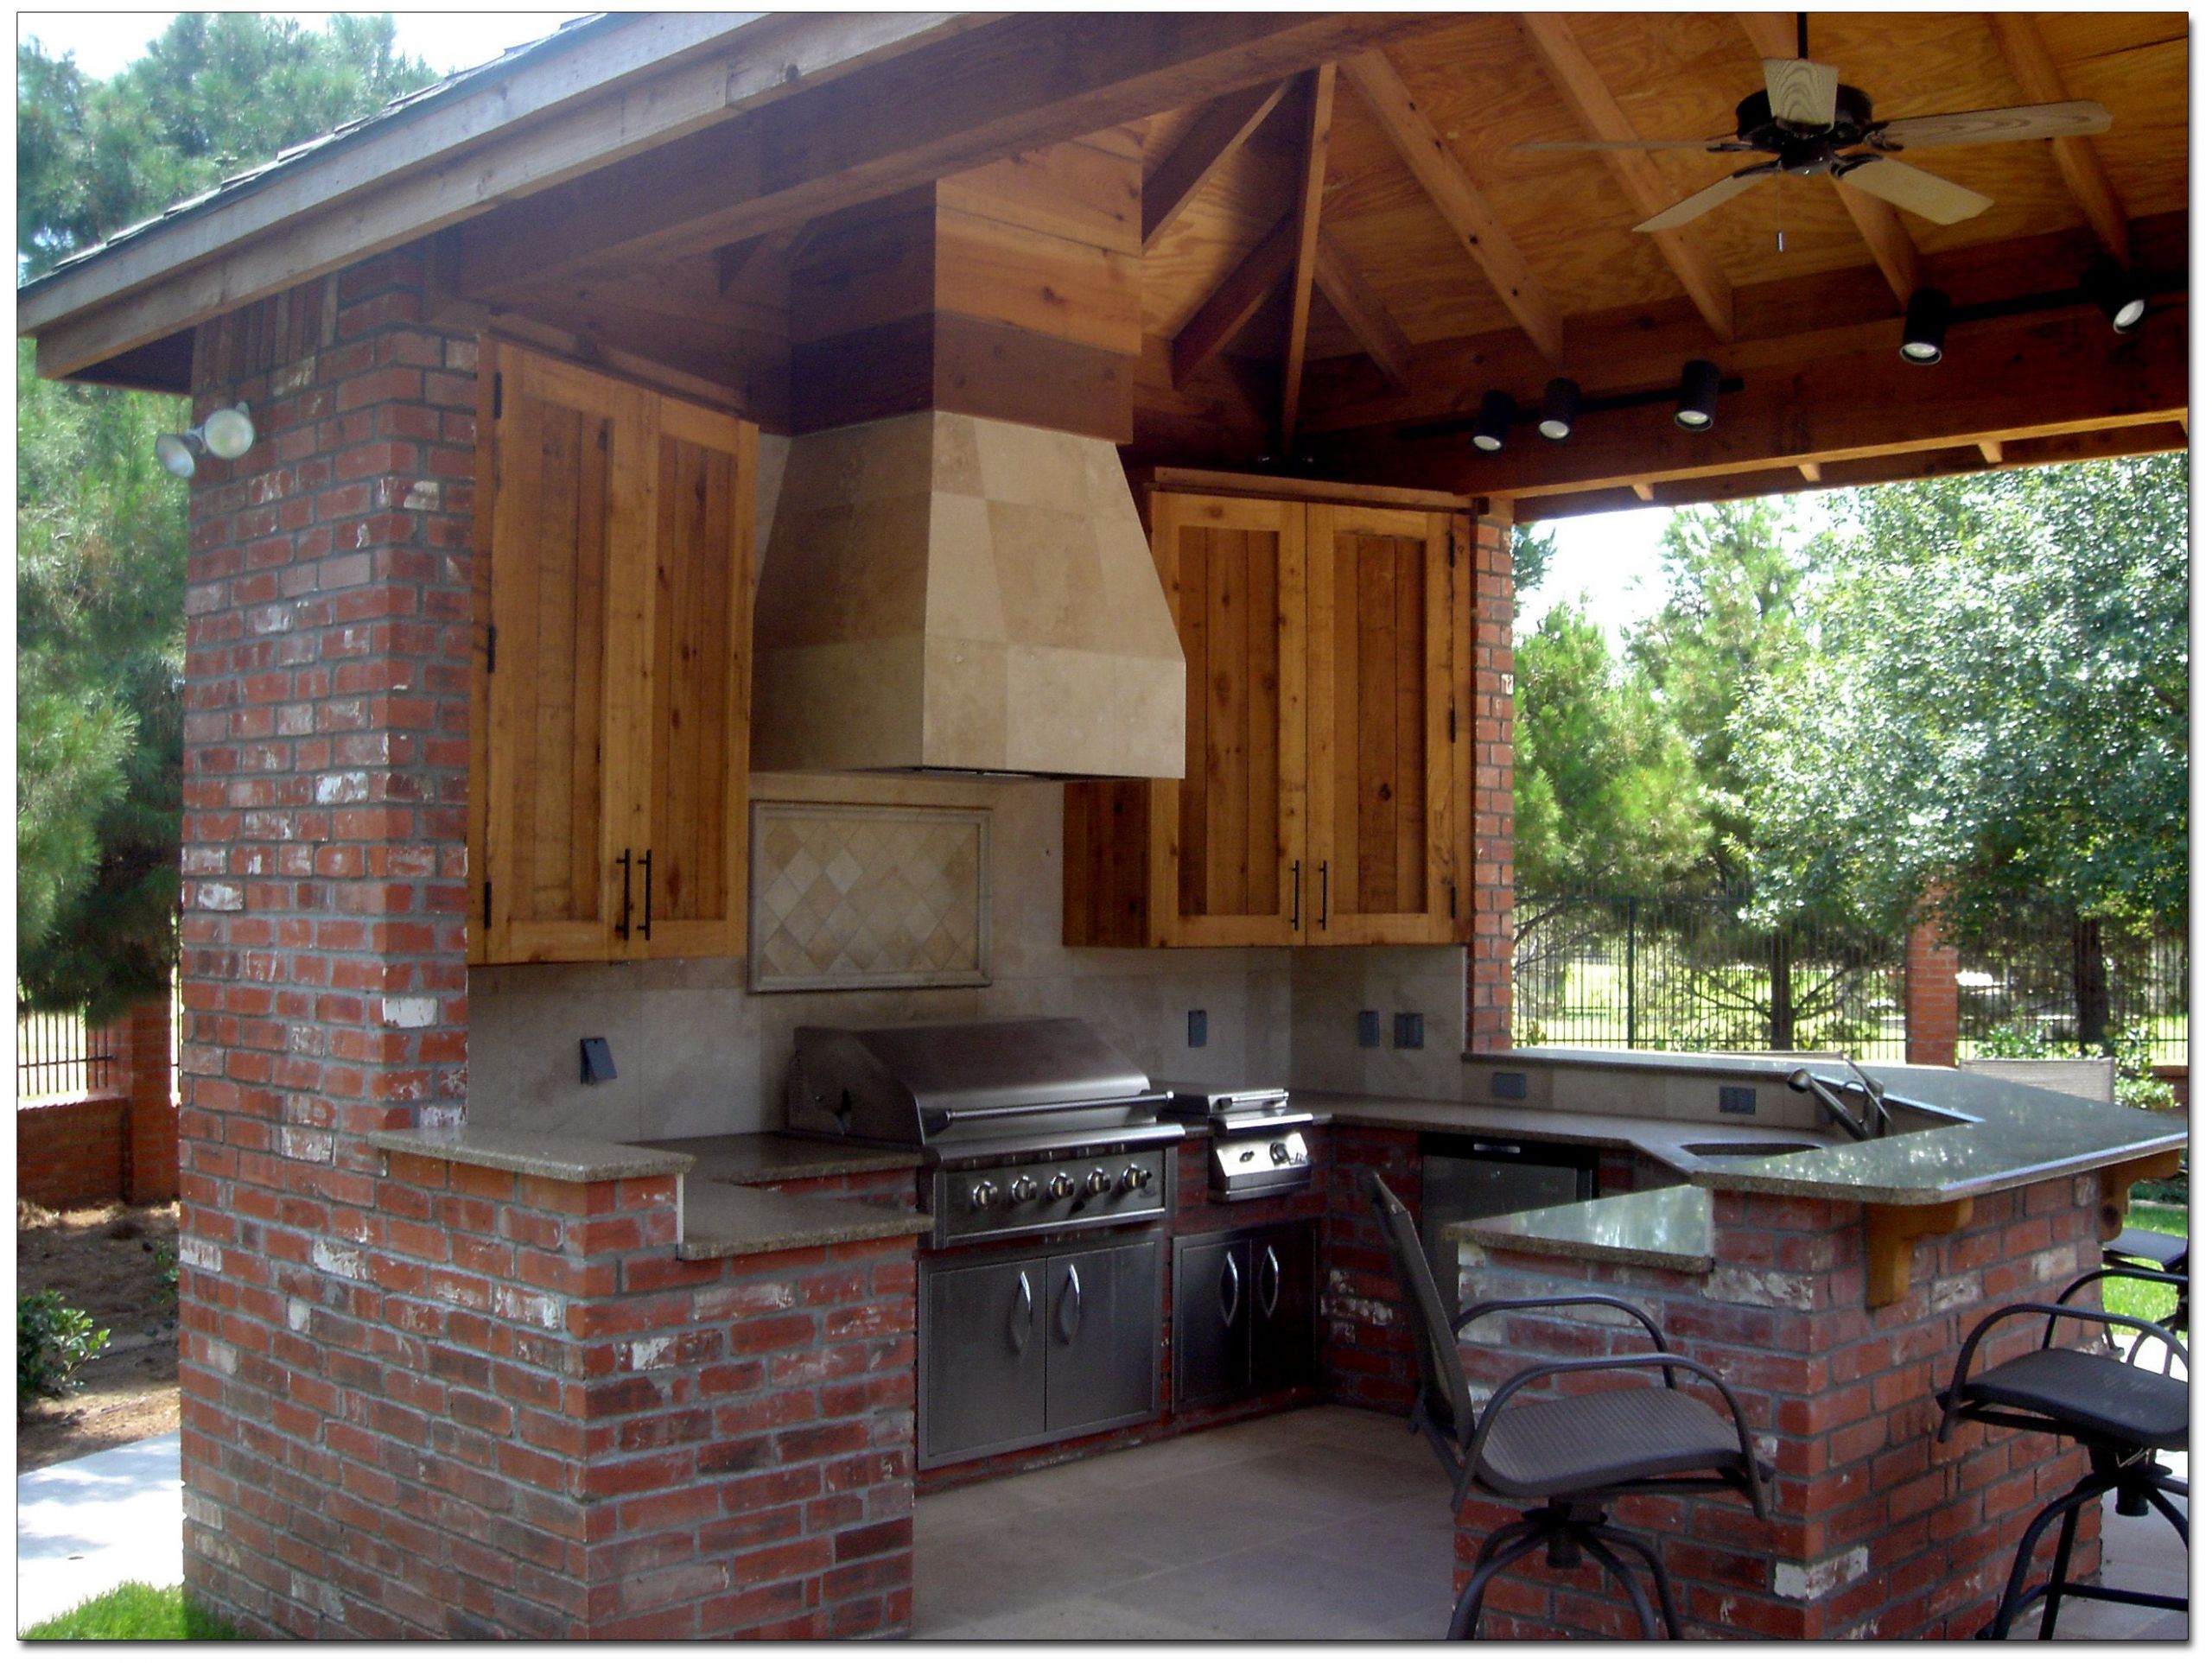 Covered Outdoor Kitchen Plans
 Outdoor Kitchen Plans Constructed Freshly in Backyard